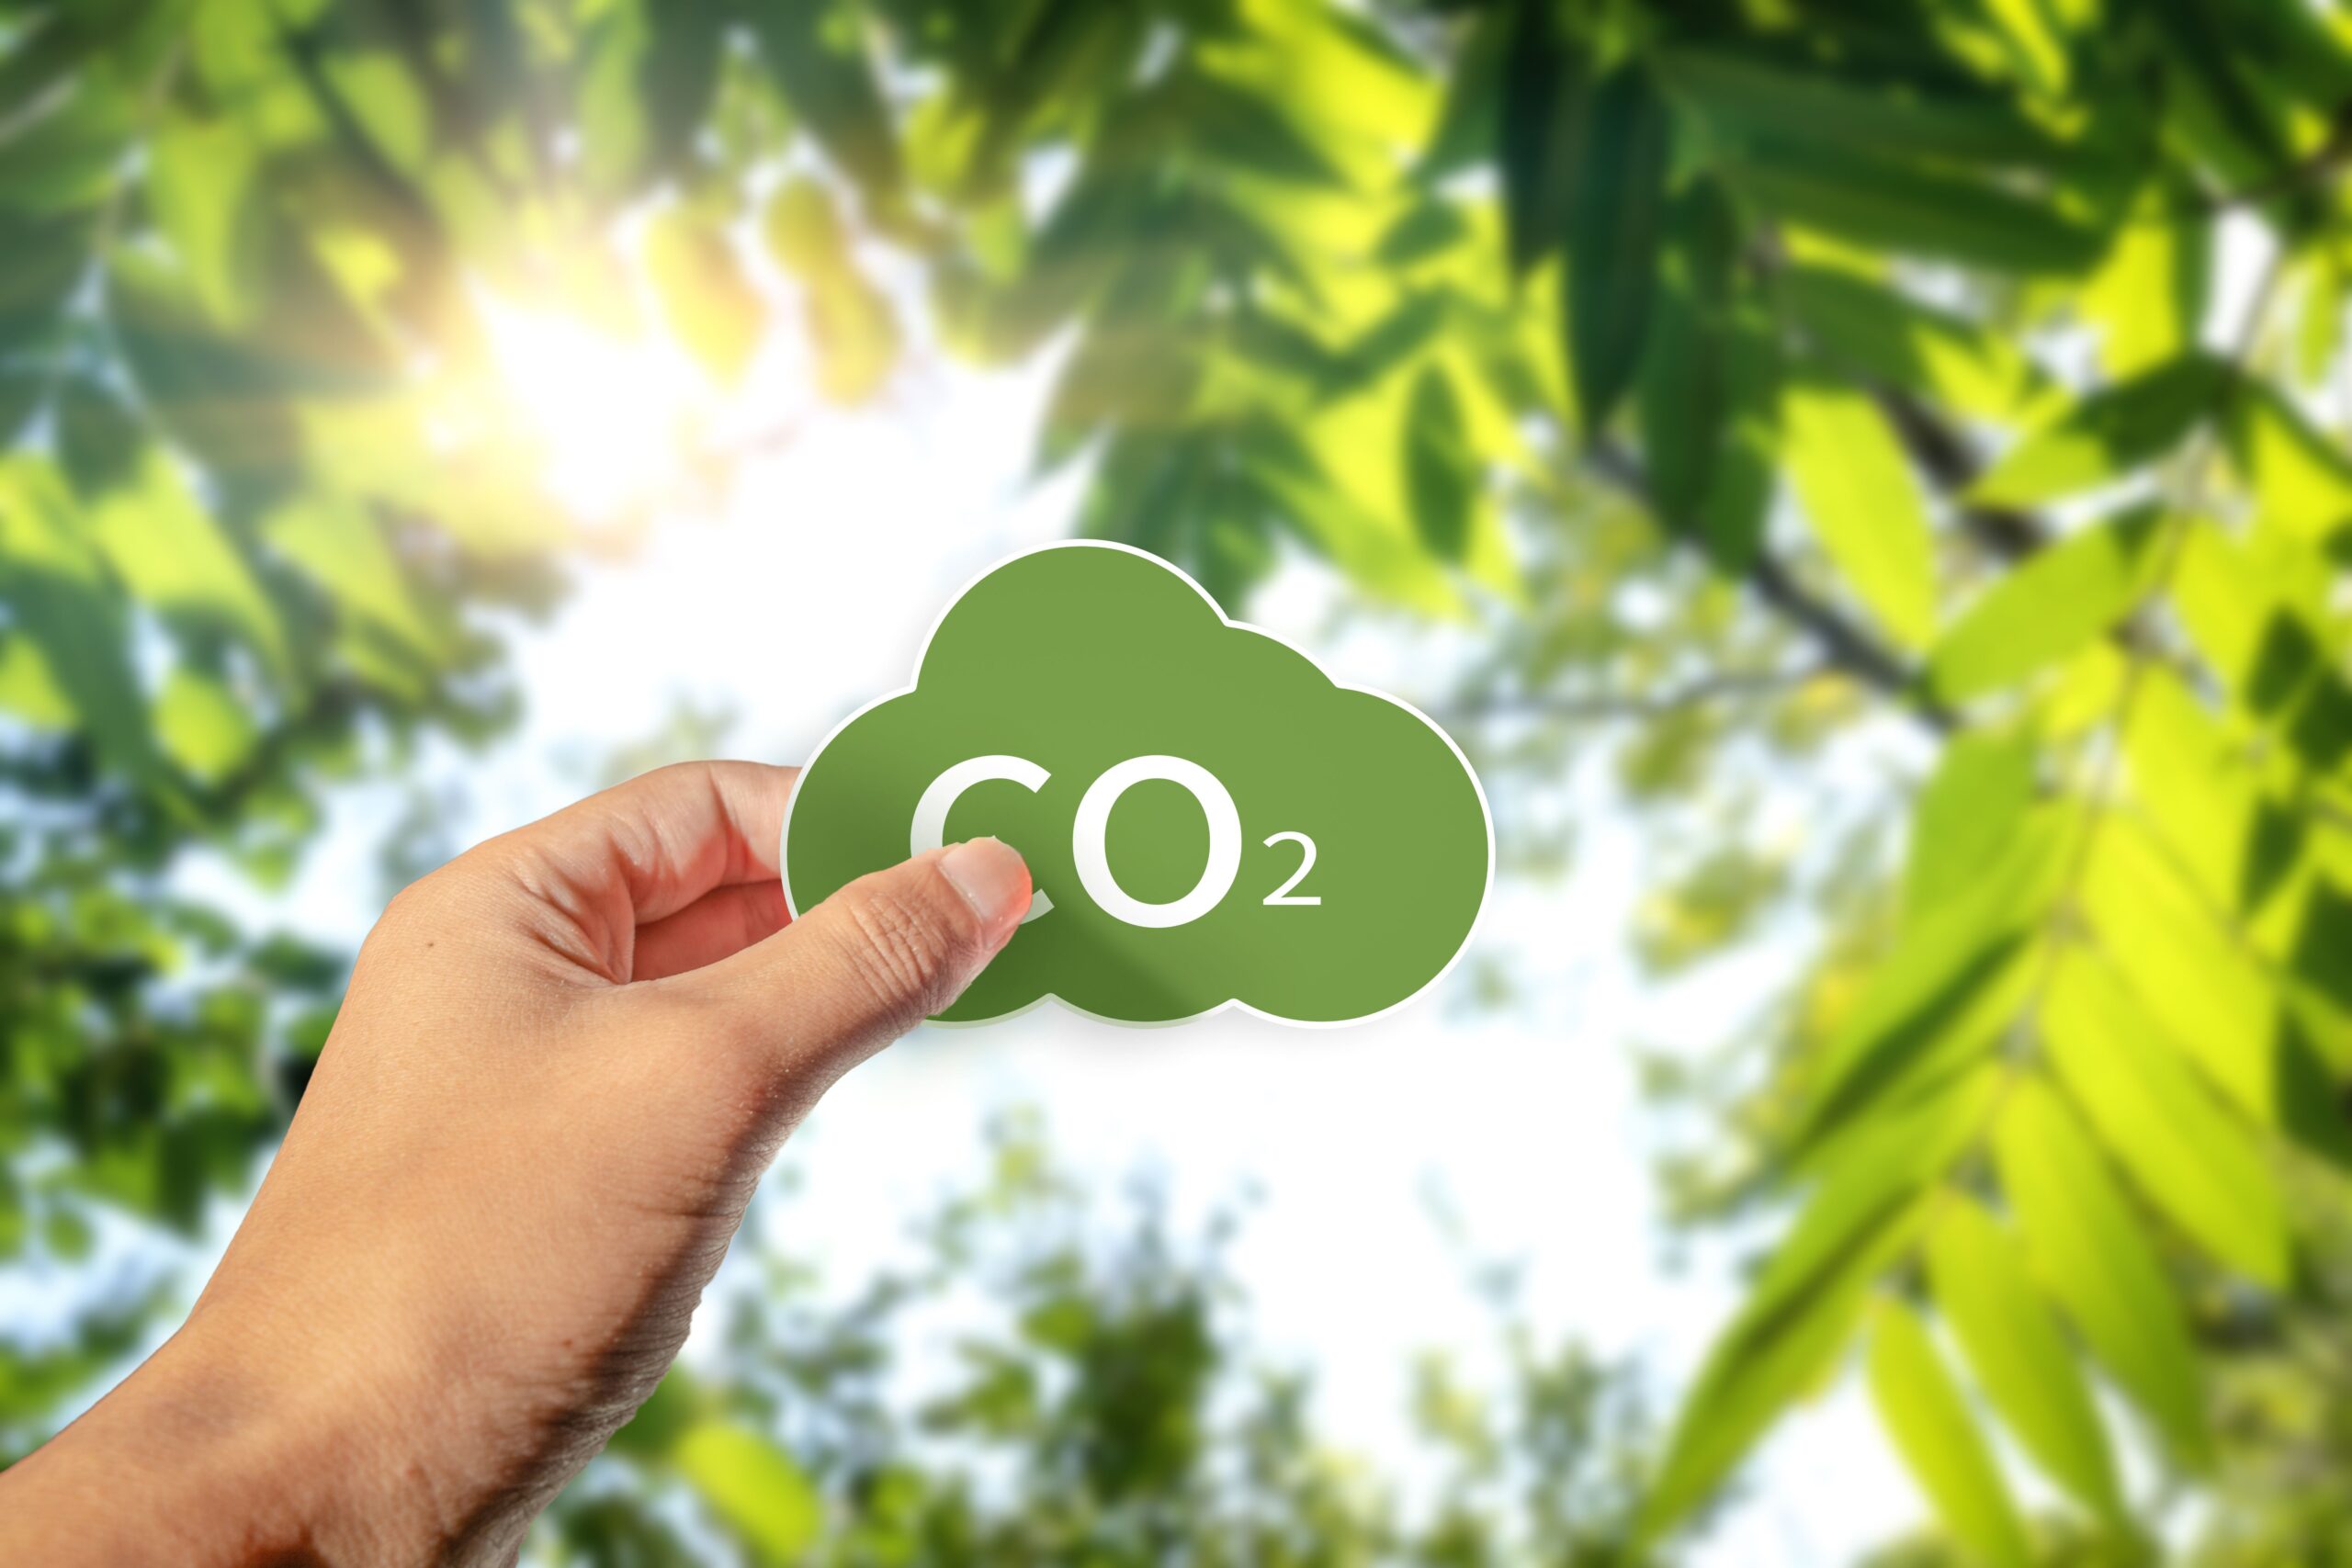 A green CO2 sign in a hand on blurred green leaves background